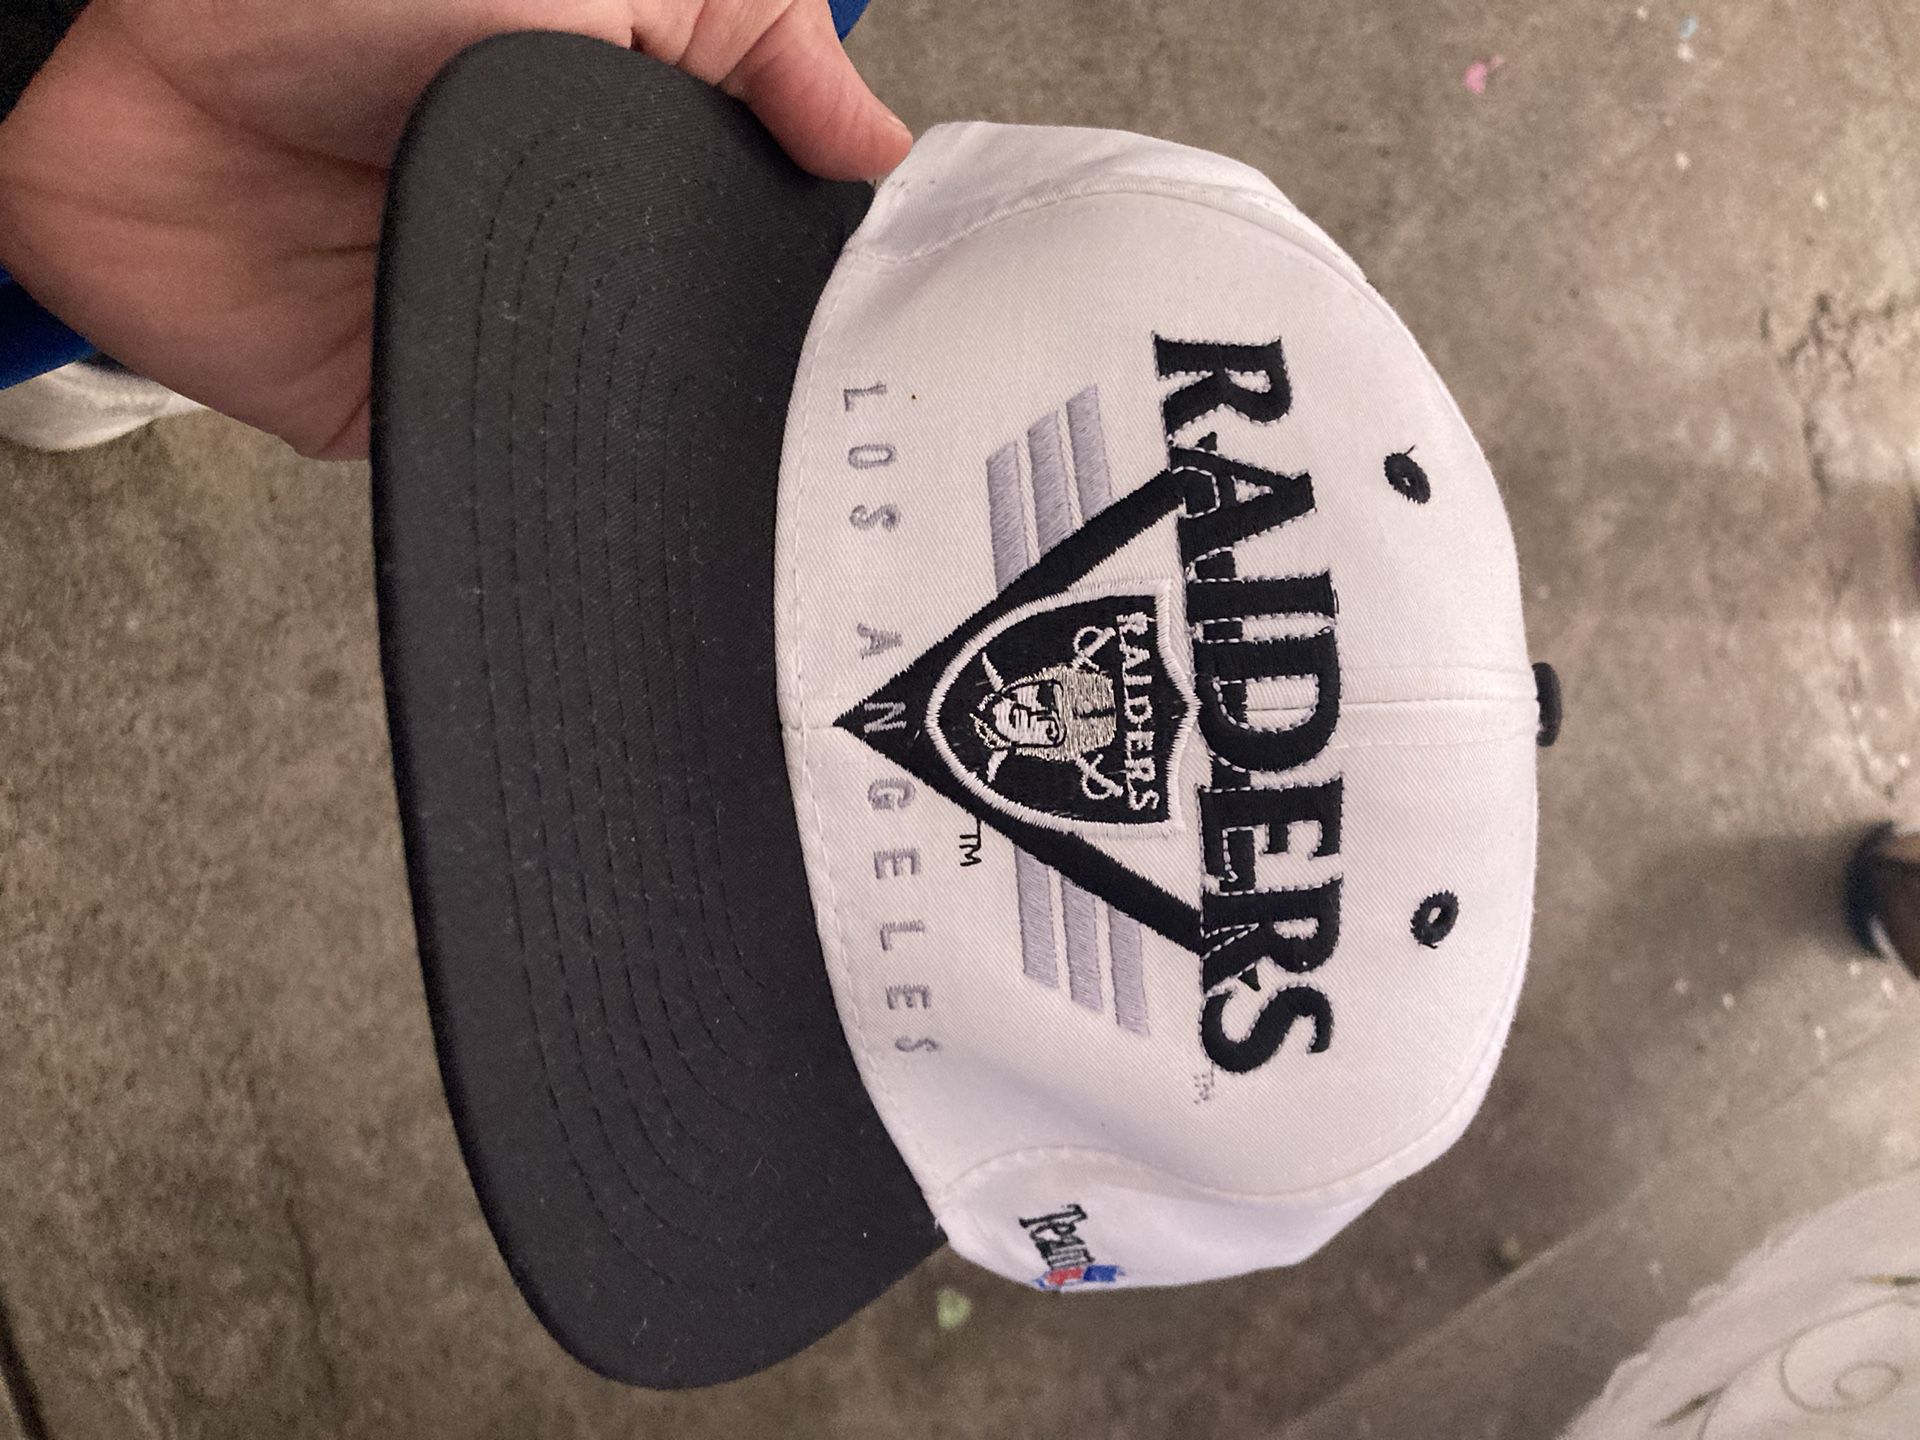 Nike Los Angeles Lakers Hat for Sale in Los Angeles, CA - OfferUp